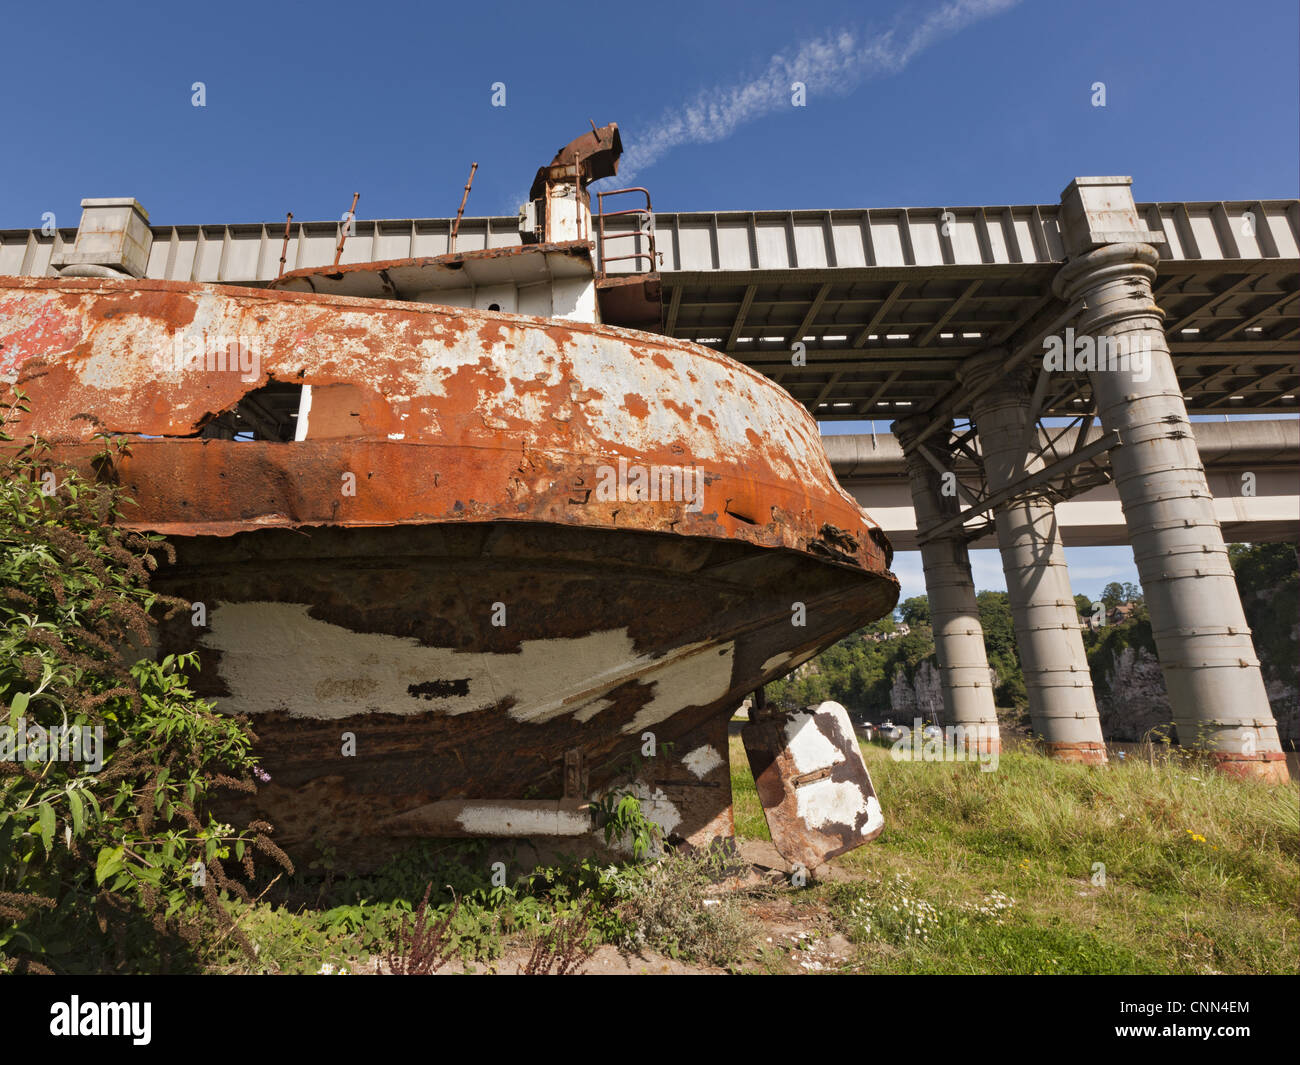 Rusting hulk of old ferry boat on bank of river, Chepstow, River Wye, Wye Valley, Monmouthshire, Wales, august Stock Photo